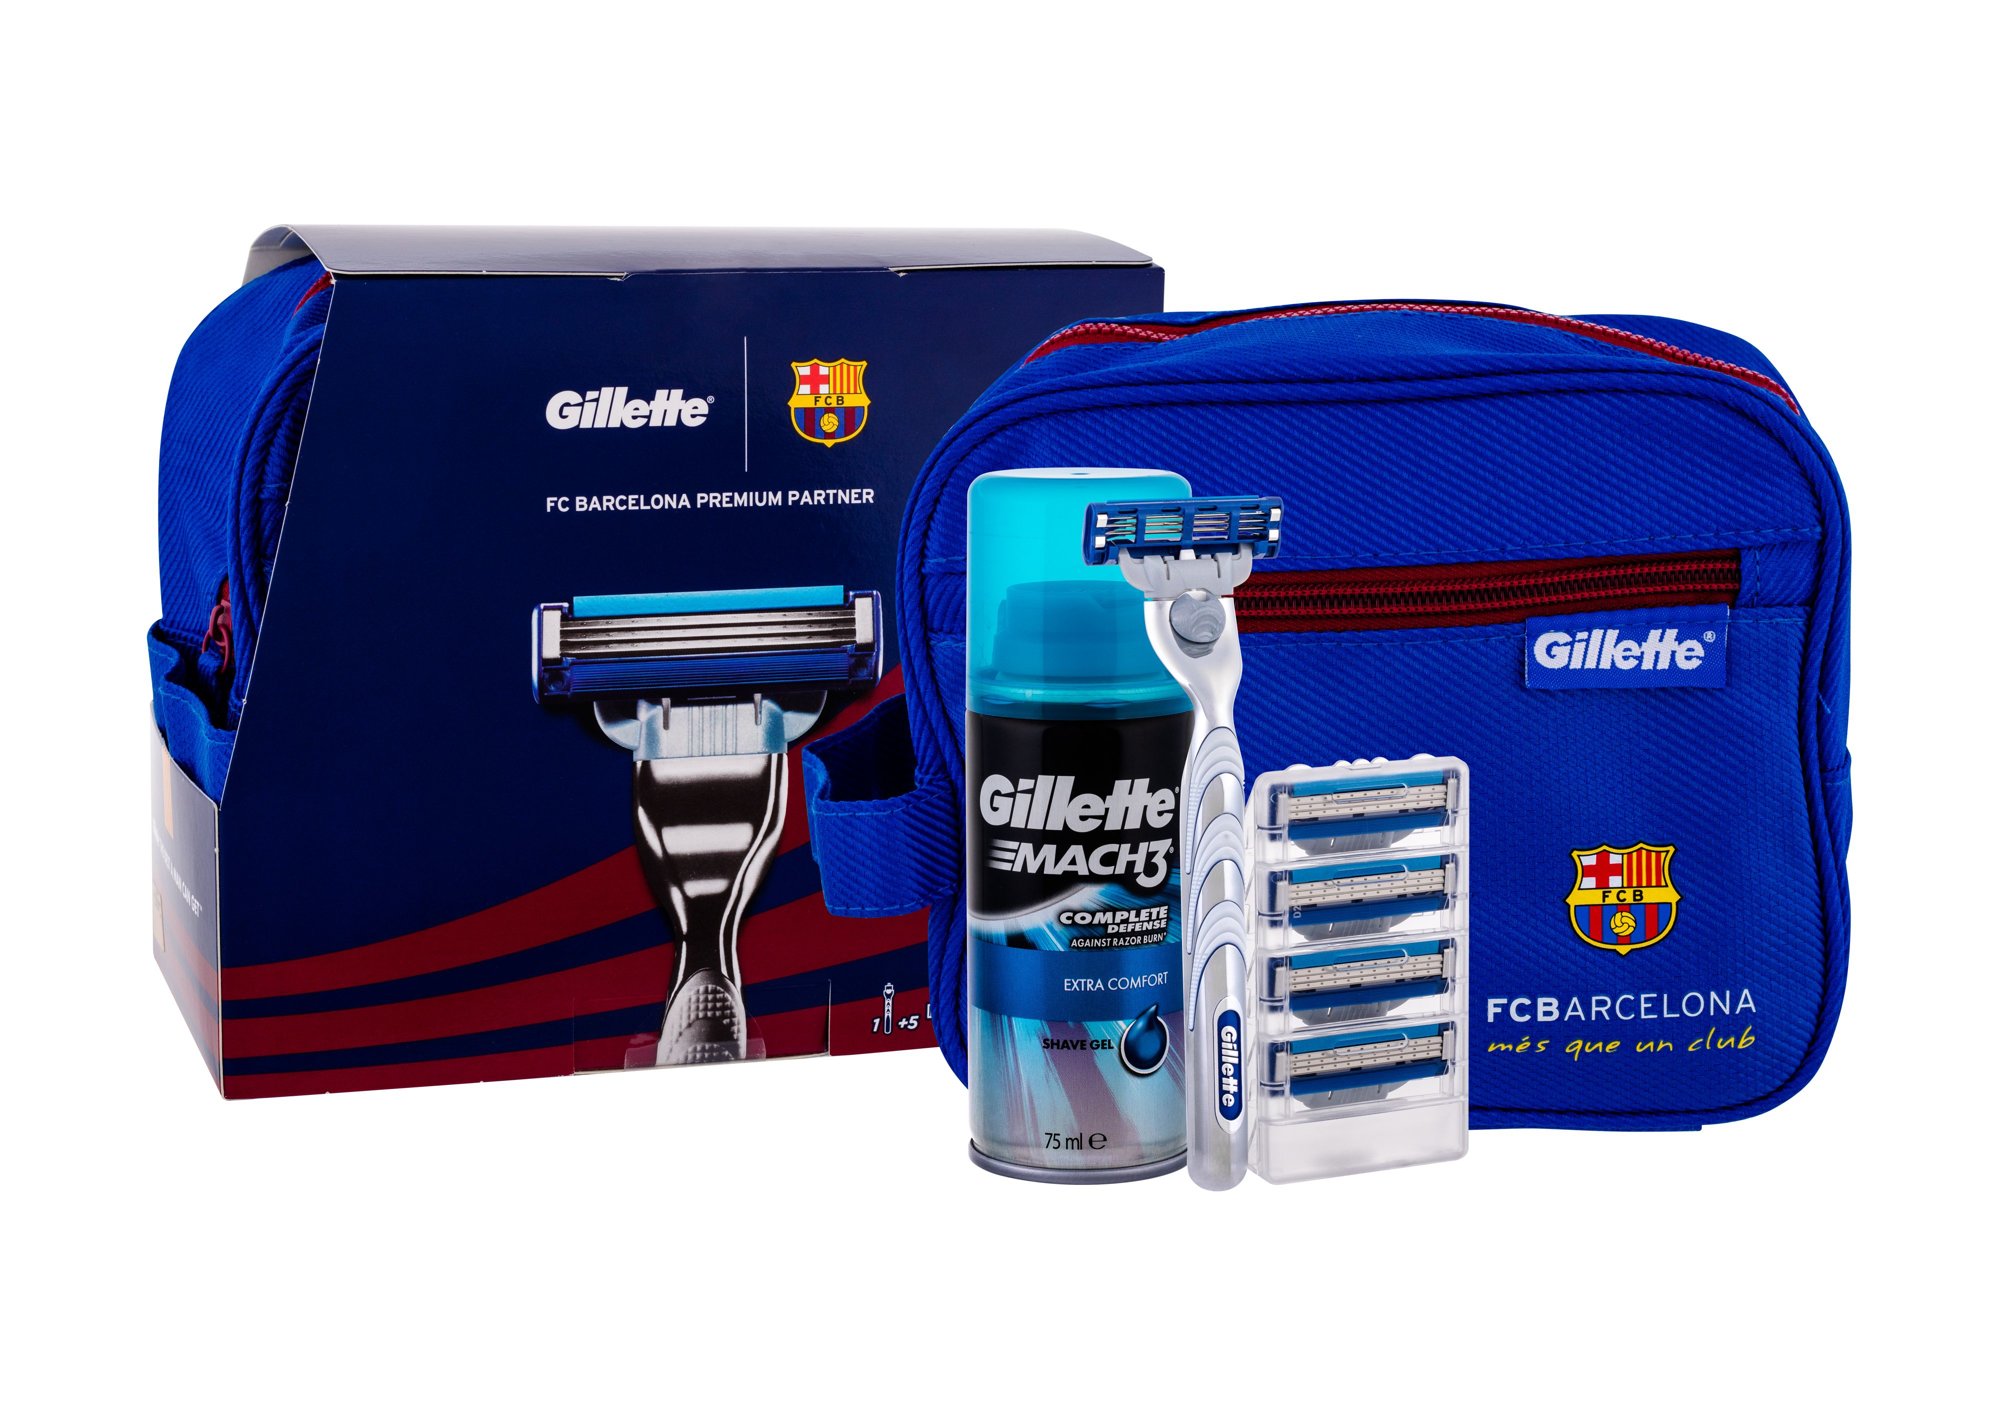 Gillette Mach3 Turbo FC Barcelona 1vnt Shave Machine With One Head 1 pcs + Spare Heads 4 pcs + Shave Gel Extra Comfort 75 ml + Cosmetic Bag skustuvas Rinkinys